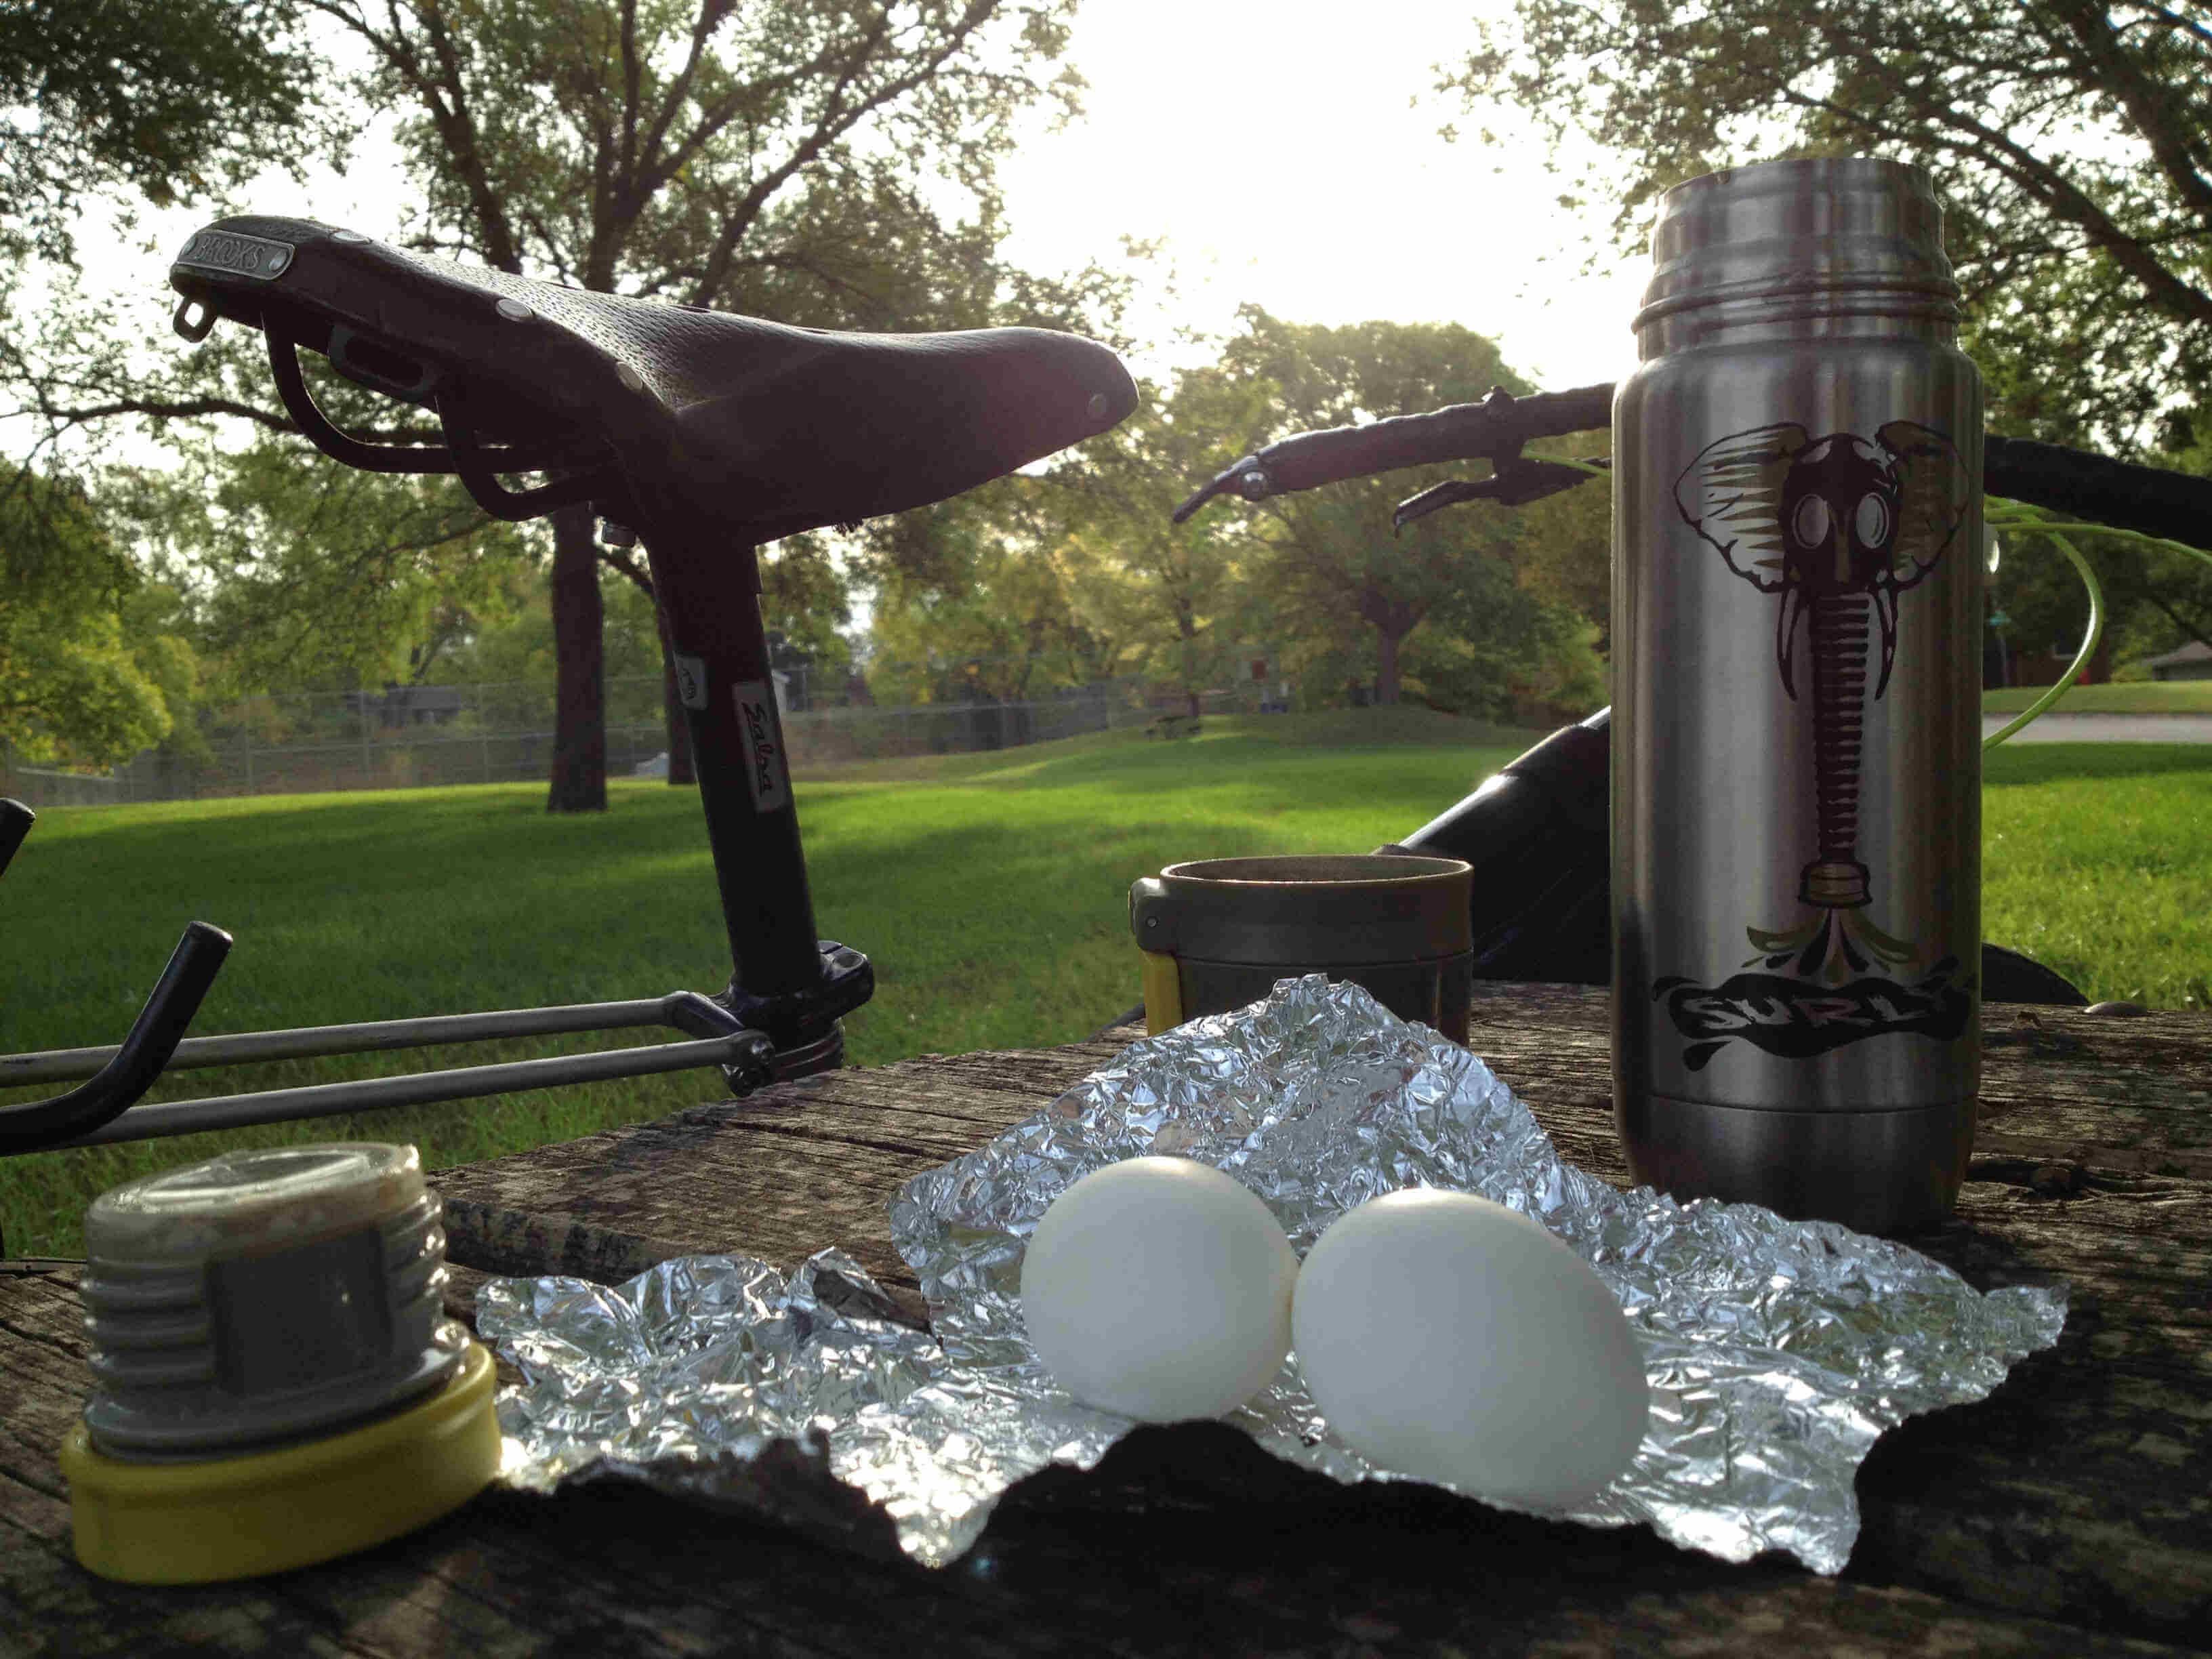 A wood picnic table with water bottle components and boiled eggs on foil, on the top, with a bike behind, in a park